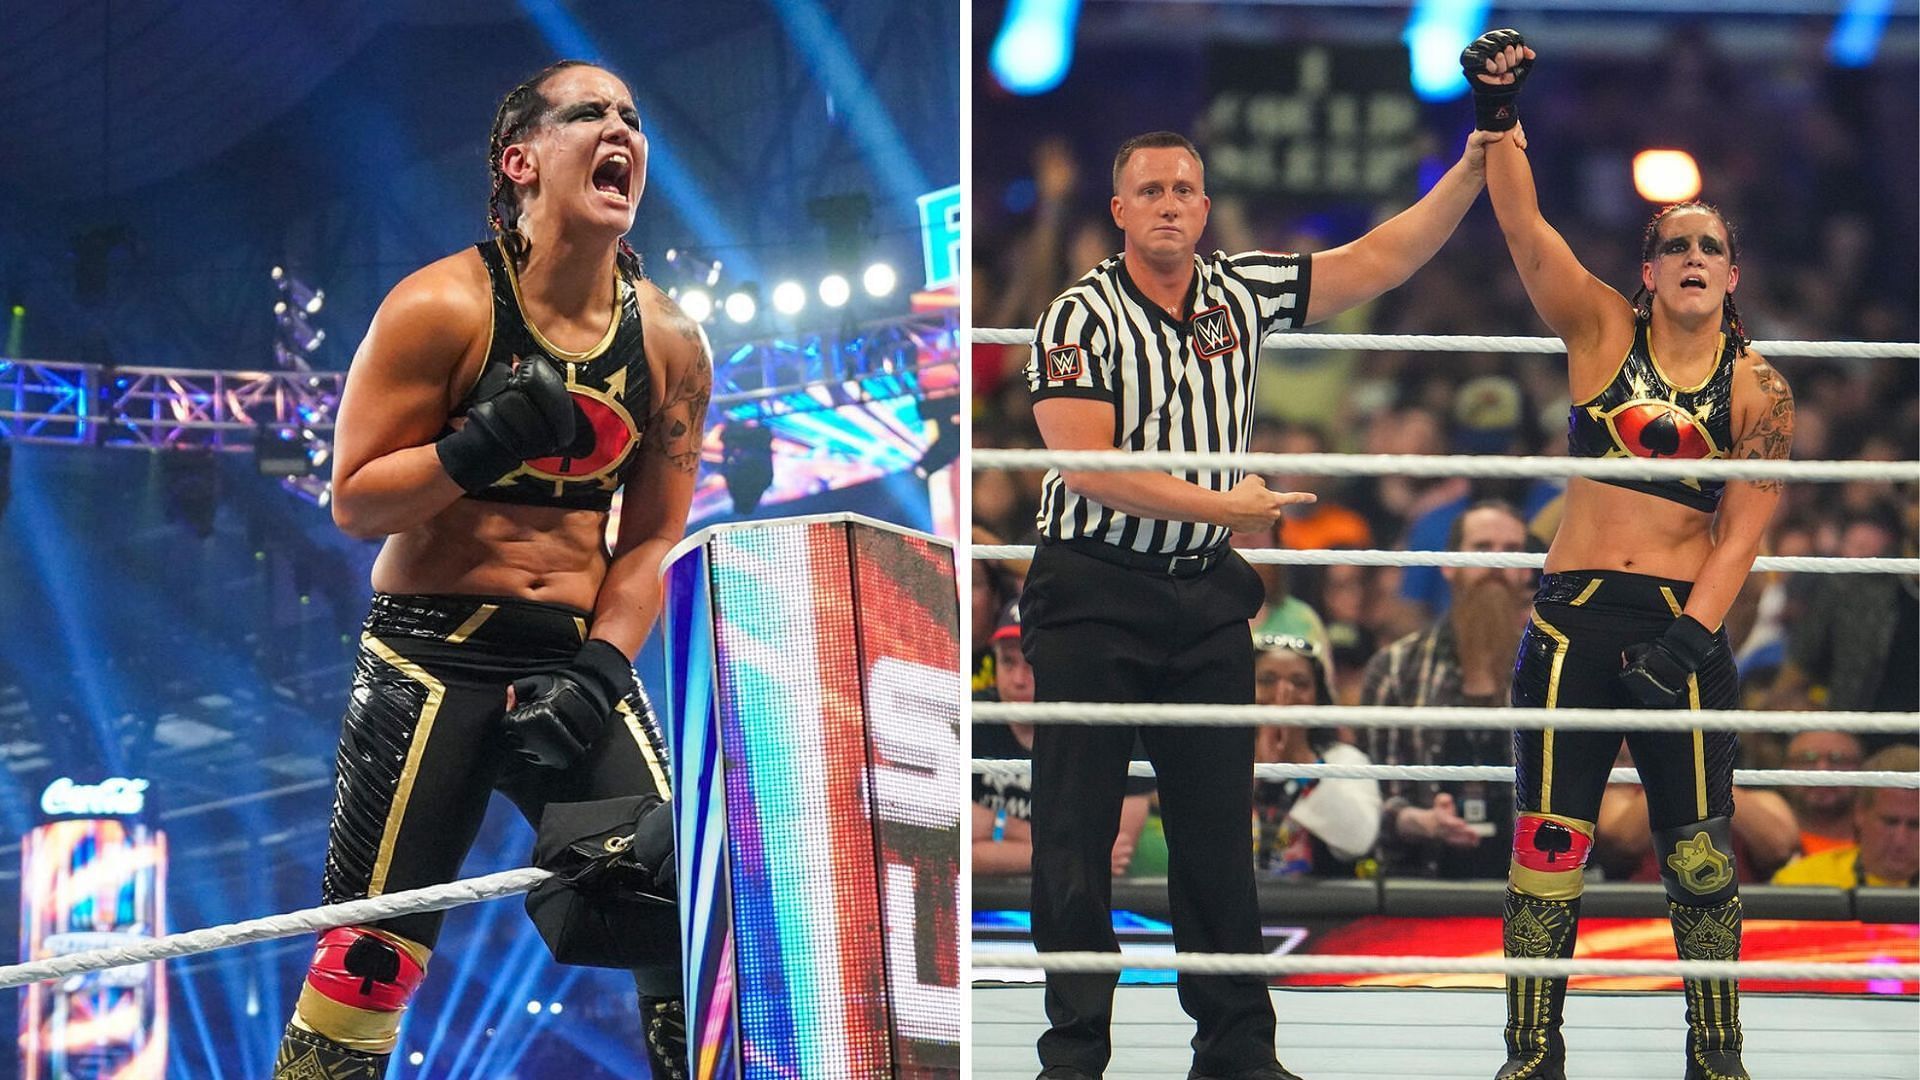 Baszler competed outside of the company today.